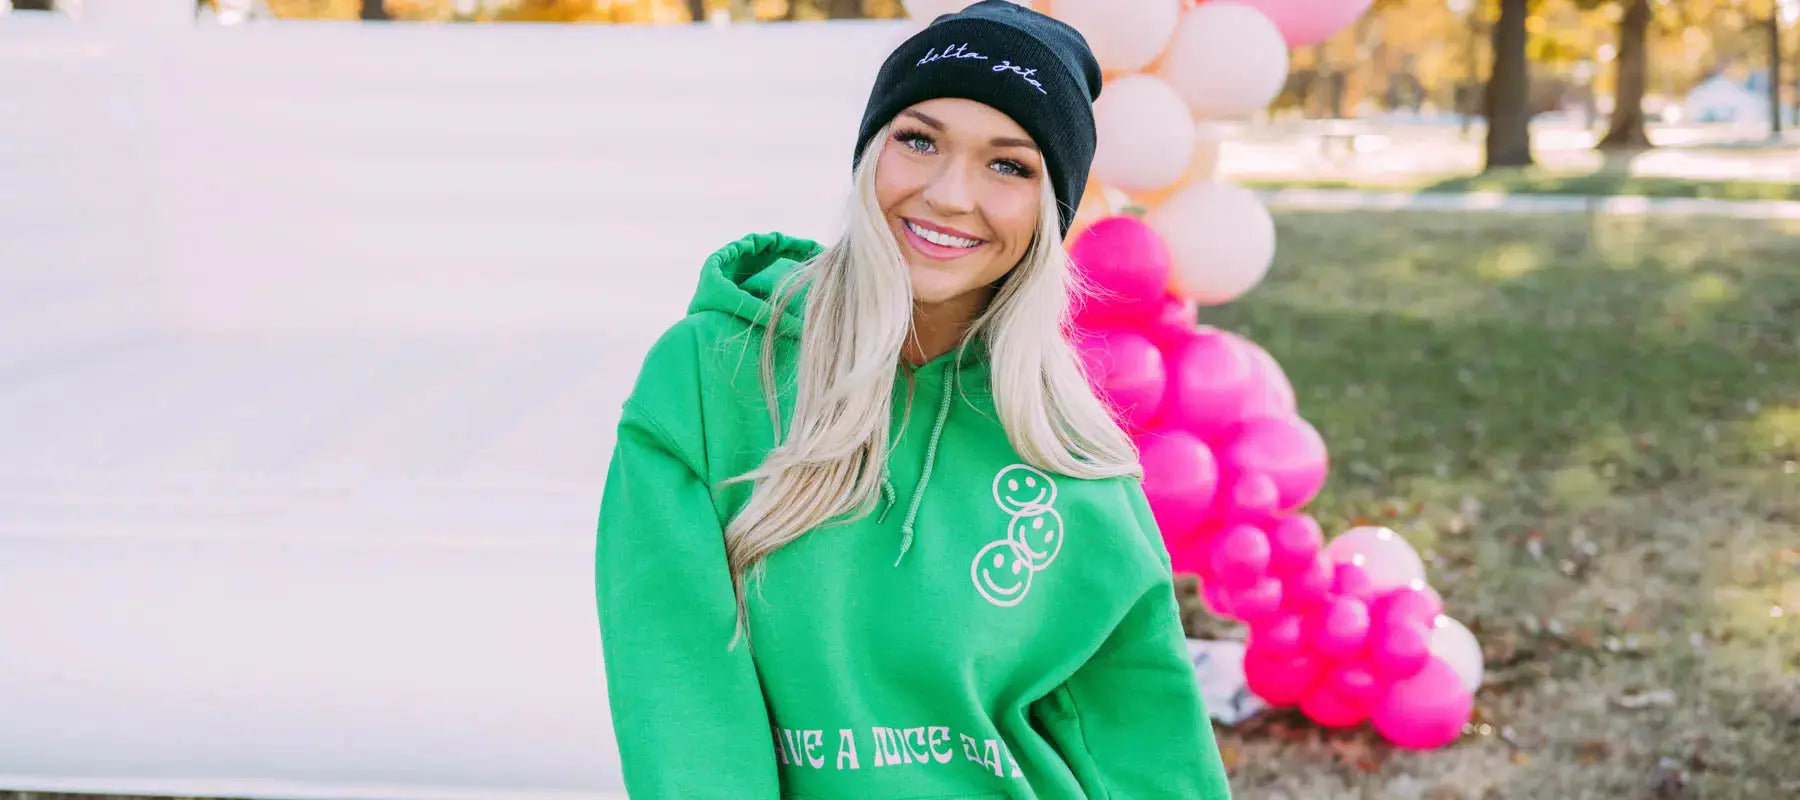 5 Items Every Sorority Girl Has in Her Closet